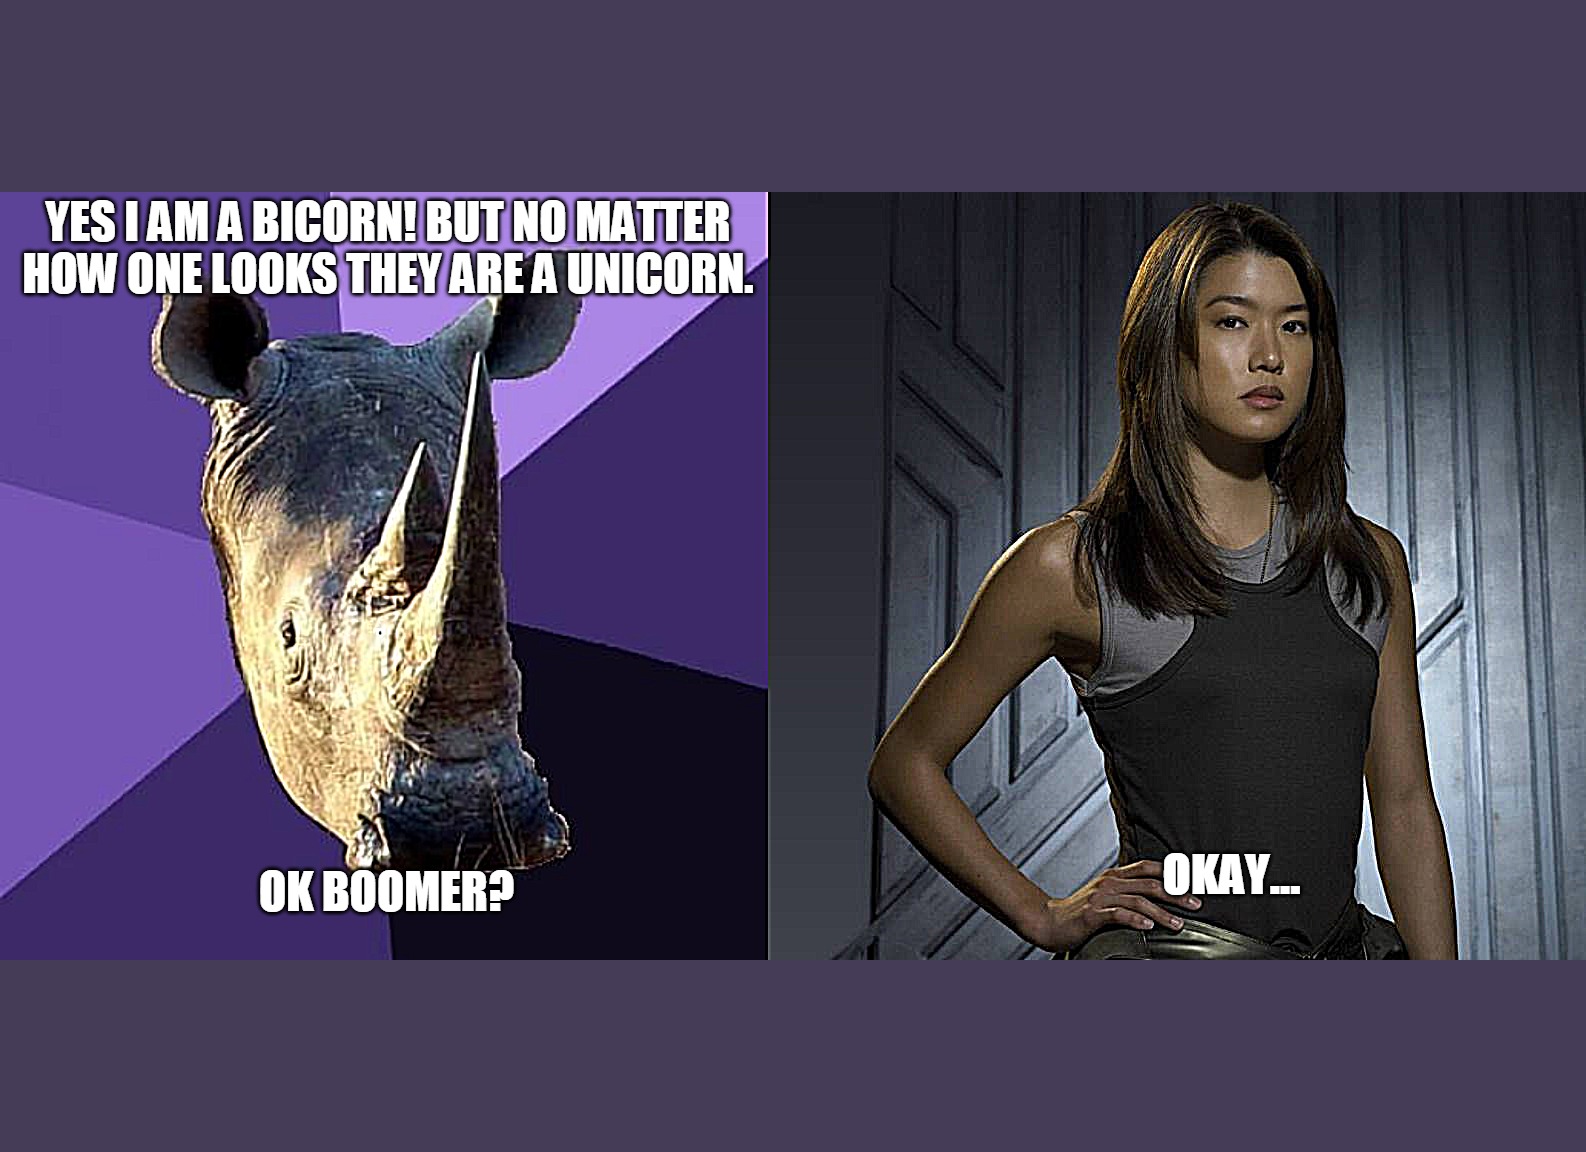 YES I AM A BICORN! BUT NO MATTER HOW ONE LOOKS THEY ARE A UNICORN. OKAY... OK BOOMER? | image tagged in memes,sexually oblivious rhino,boomer battlestar galactica | made w/ Imgflip meme maker